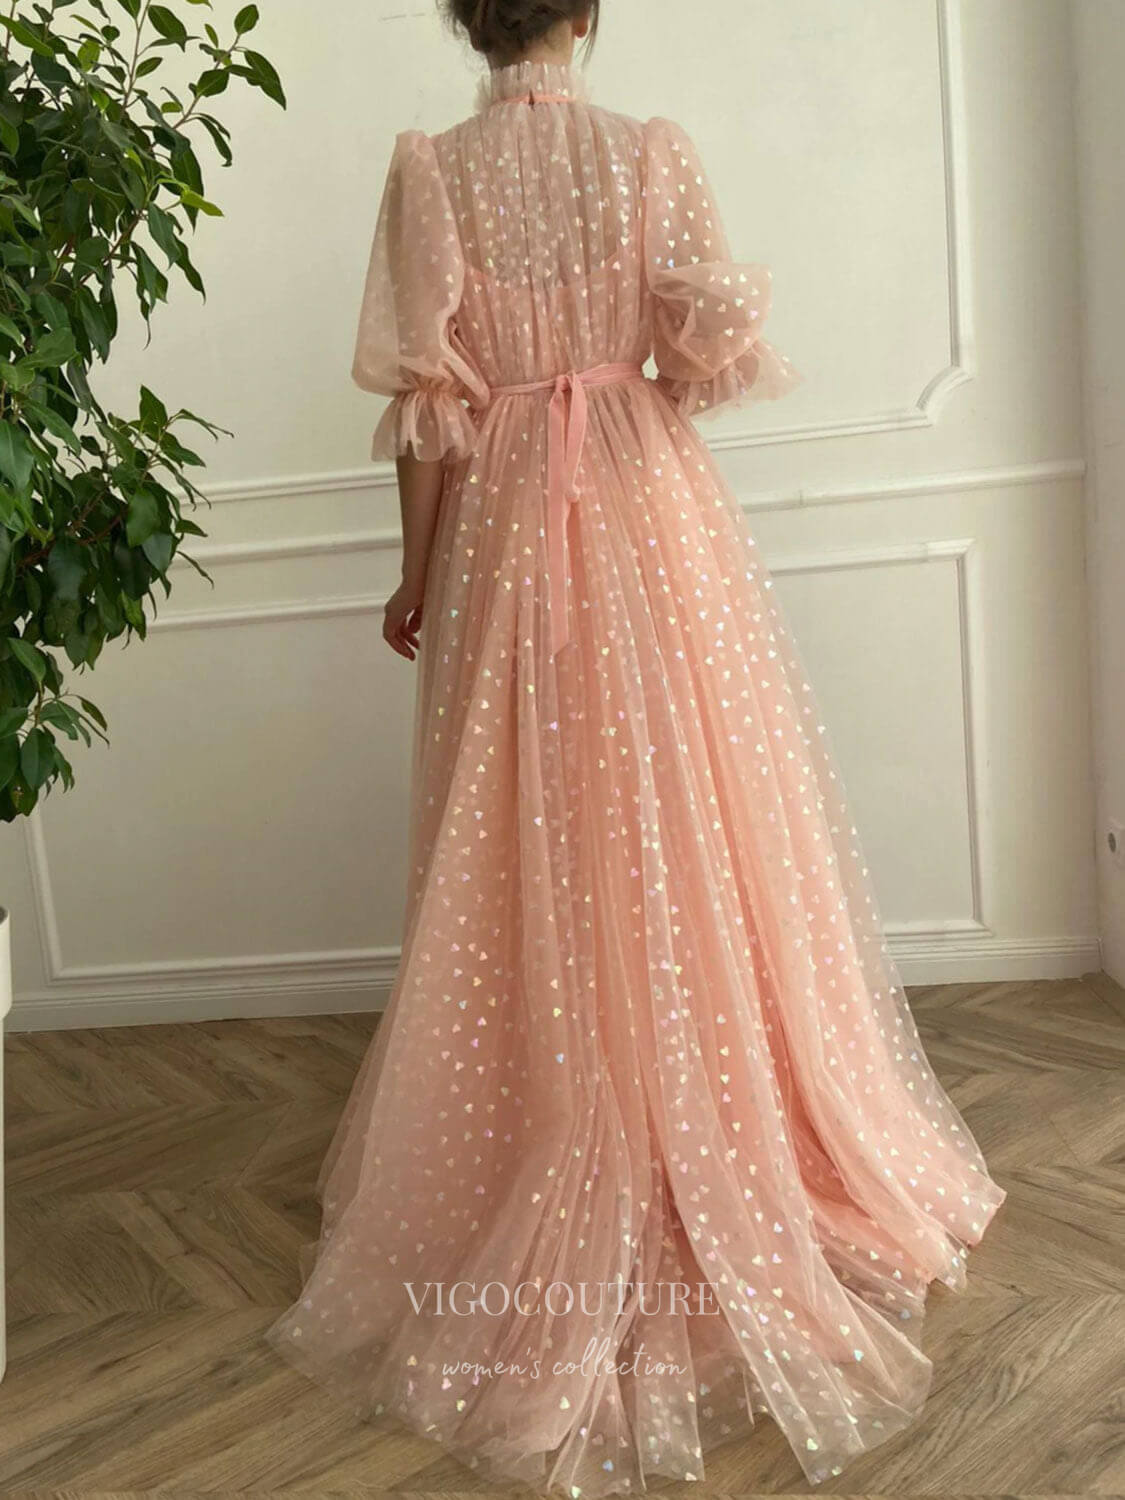 vigocouture-Blush Pink Starry Tulle Prom Dresses High Neck Elbow Sleeve Evening Dress 21777-Prom Dresses-vigocouture-